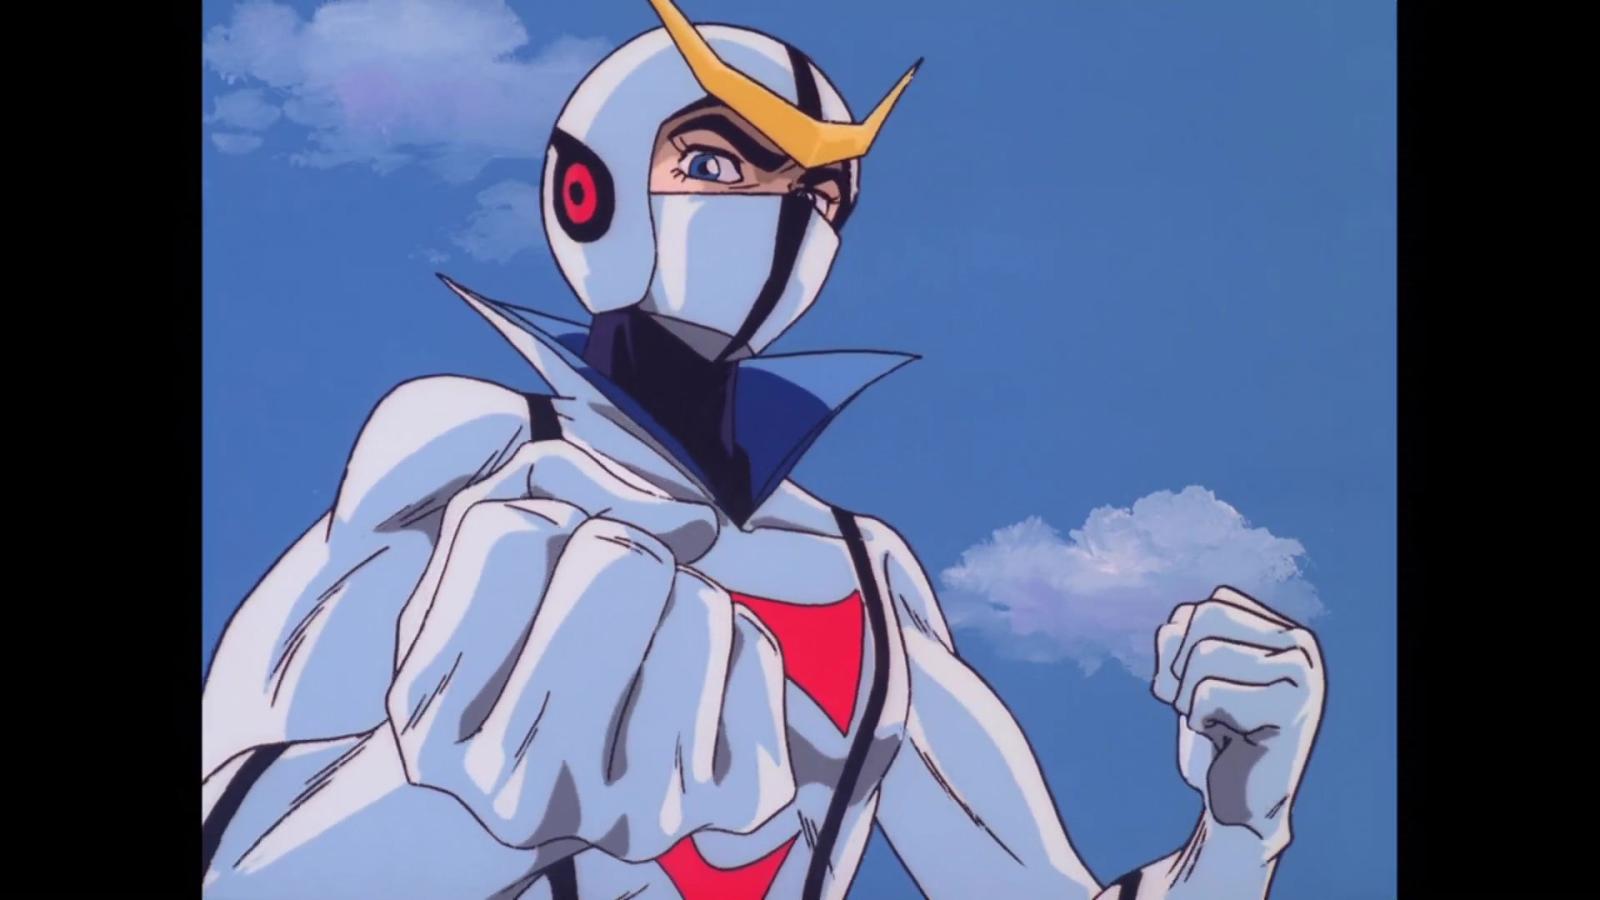 Tatsunoko Super Heroes - OAV Collection - Limited Edition 5 Blu-ray + Booklet (Blu-ray) Image 17